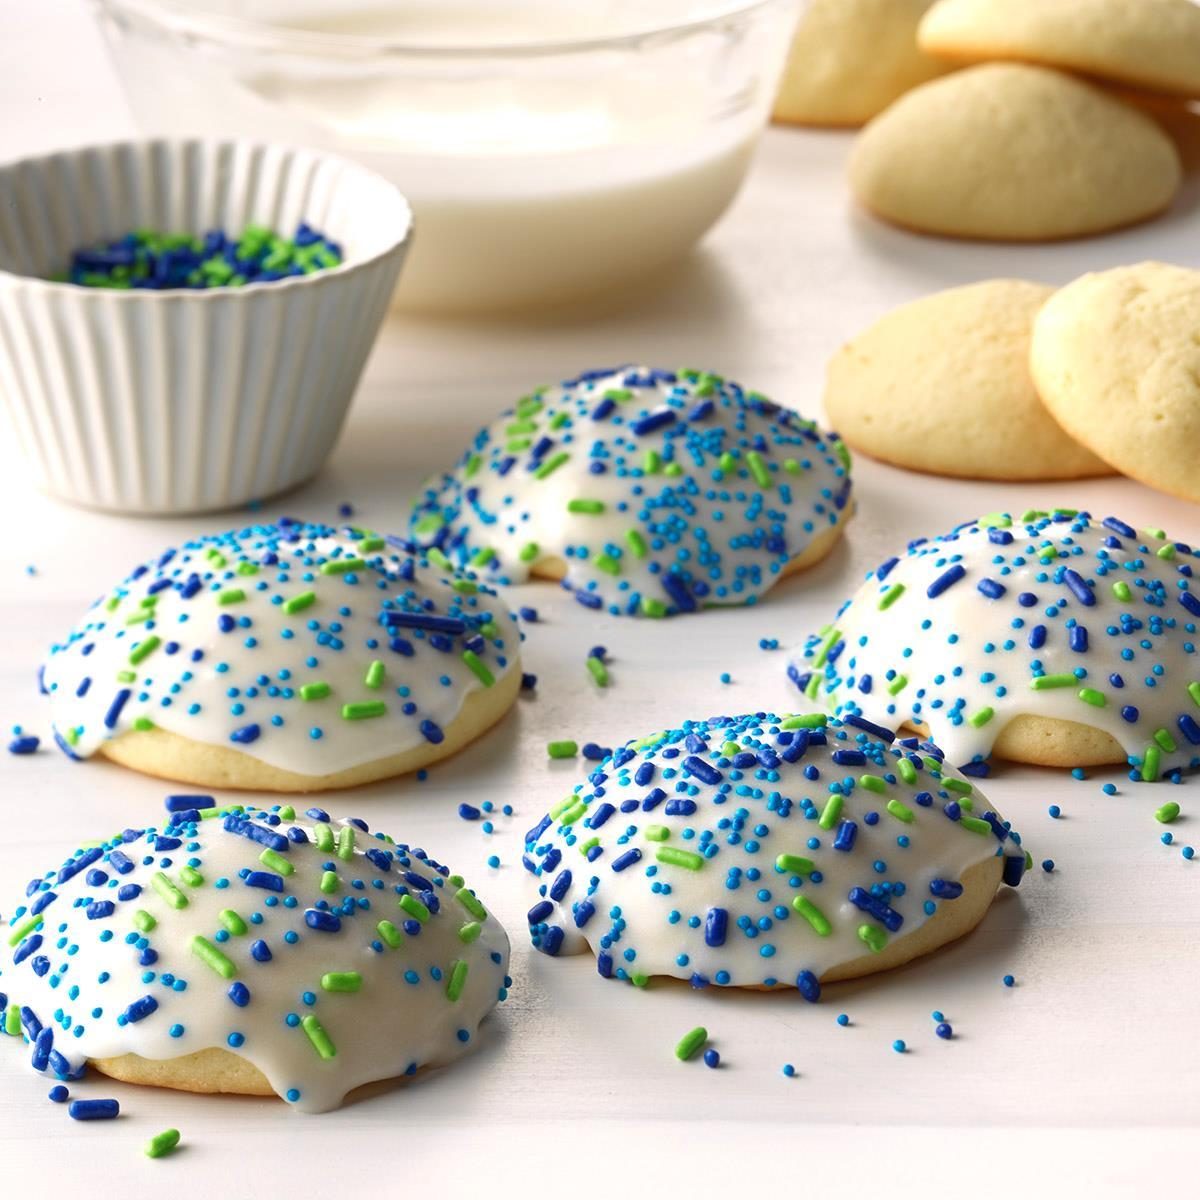 Frosted Anise Sugar Cookies Recipe | Taste of Home